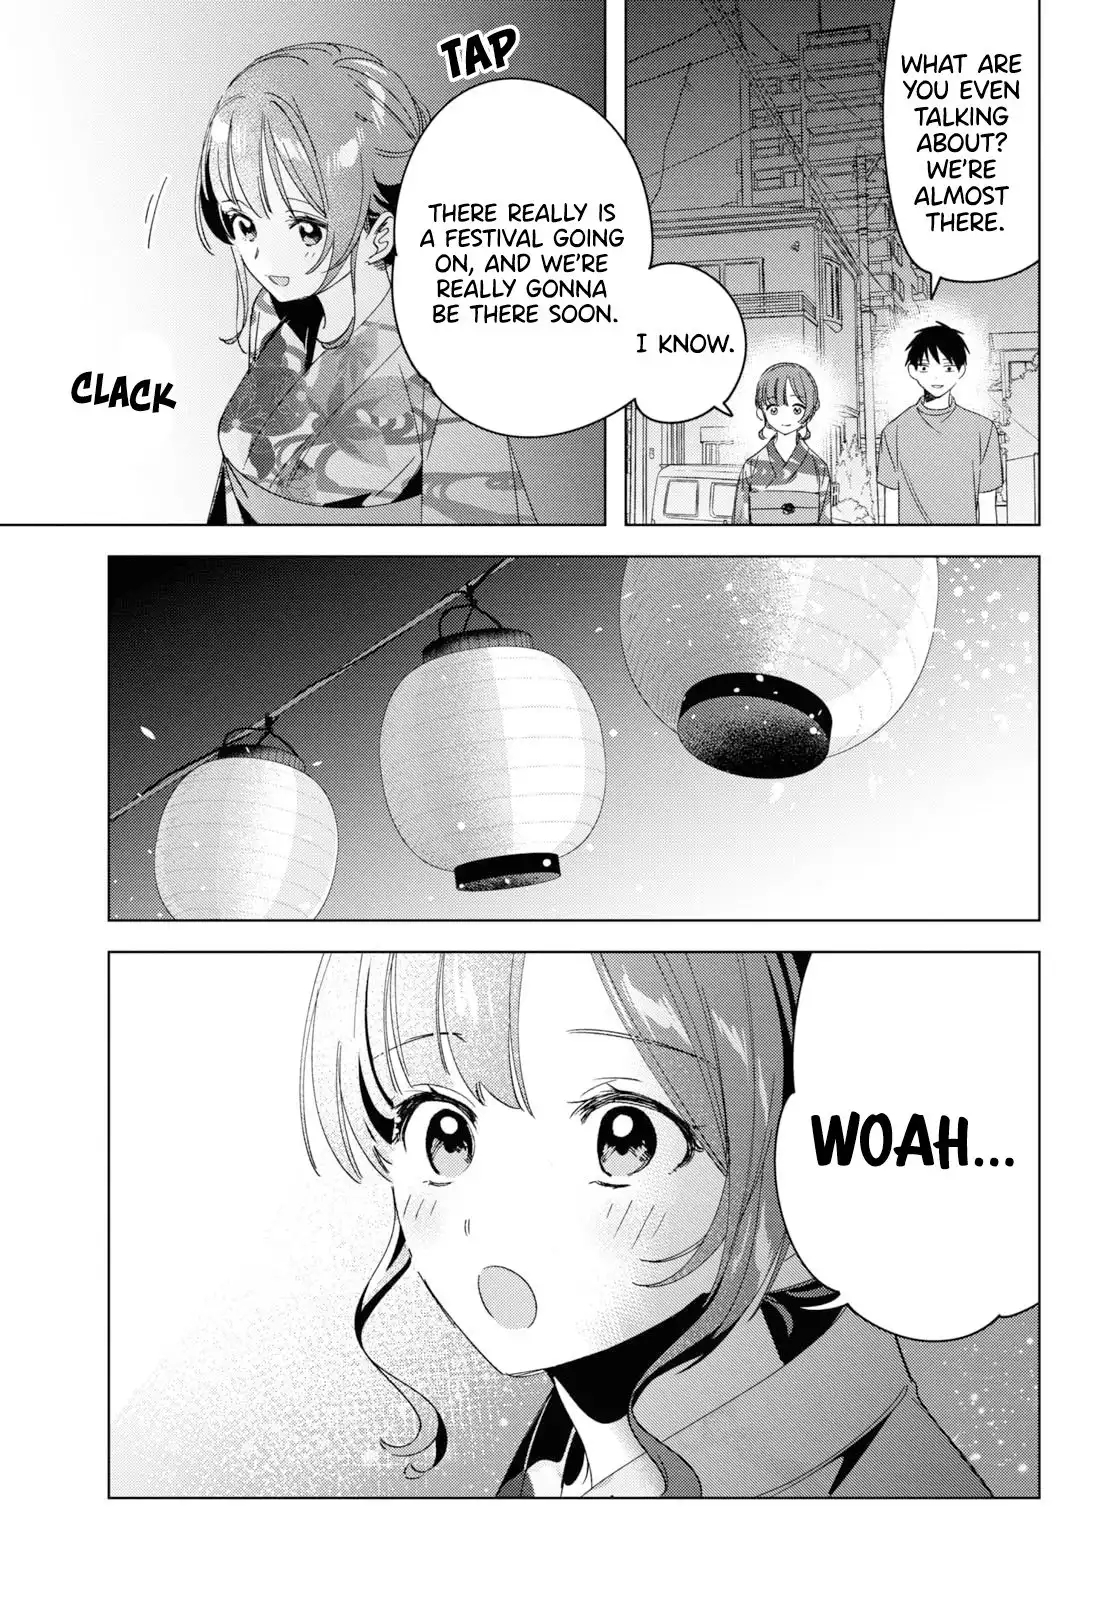 I Shaved. Then I Brought a High School Girl Home. Chapter 34